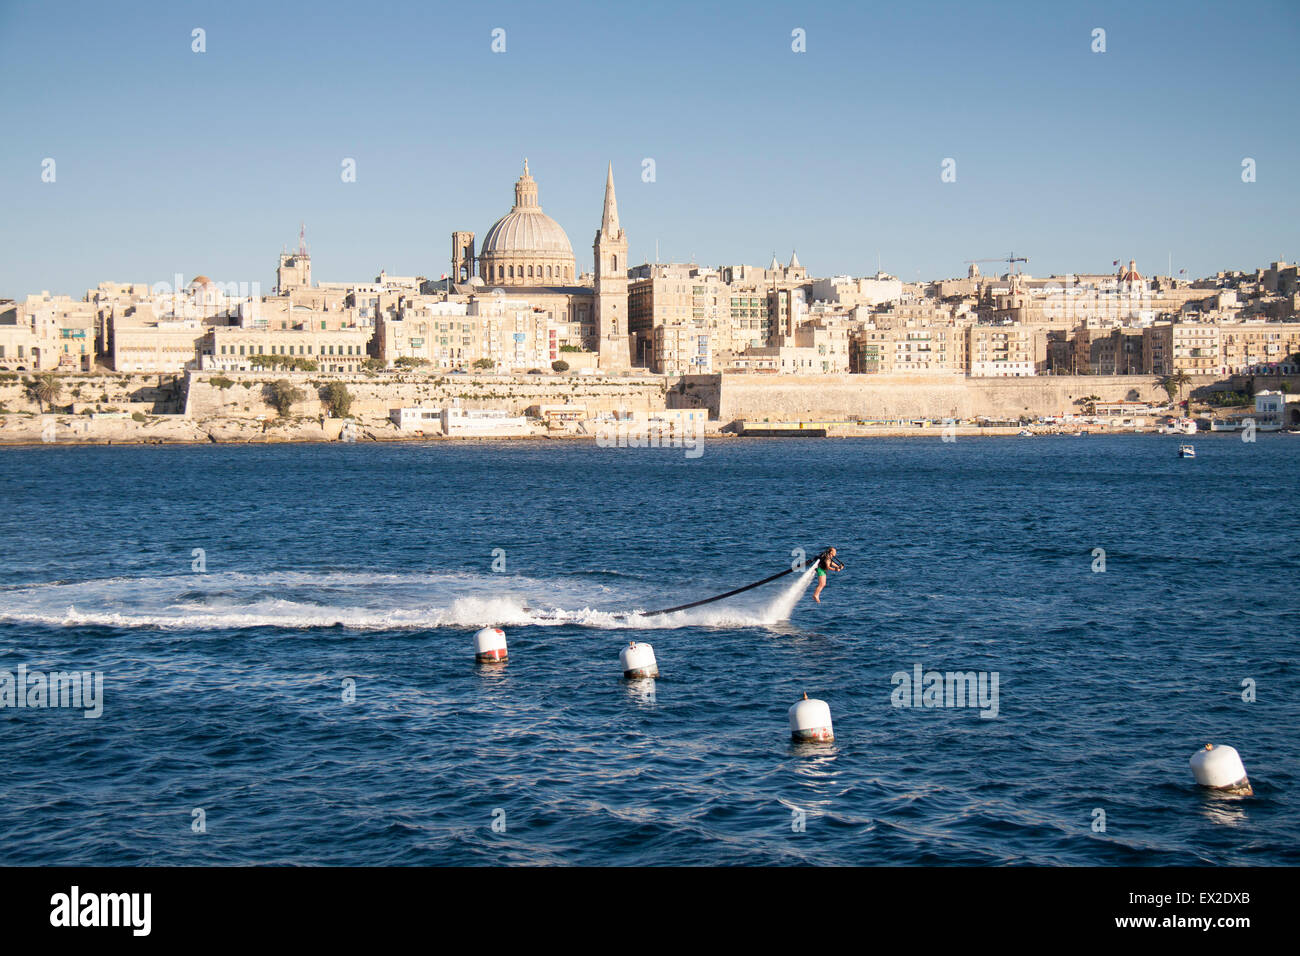 An innovative man plays with a jet pack in the waters between Valletta and Silema, Malta Stock Photo